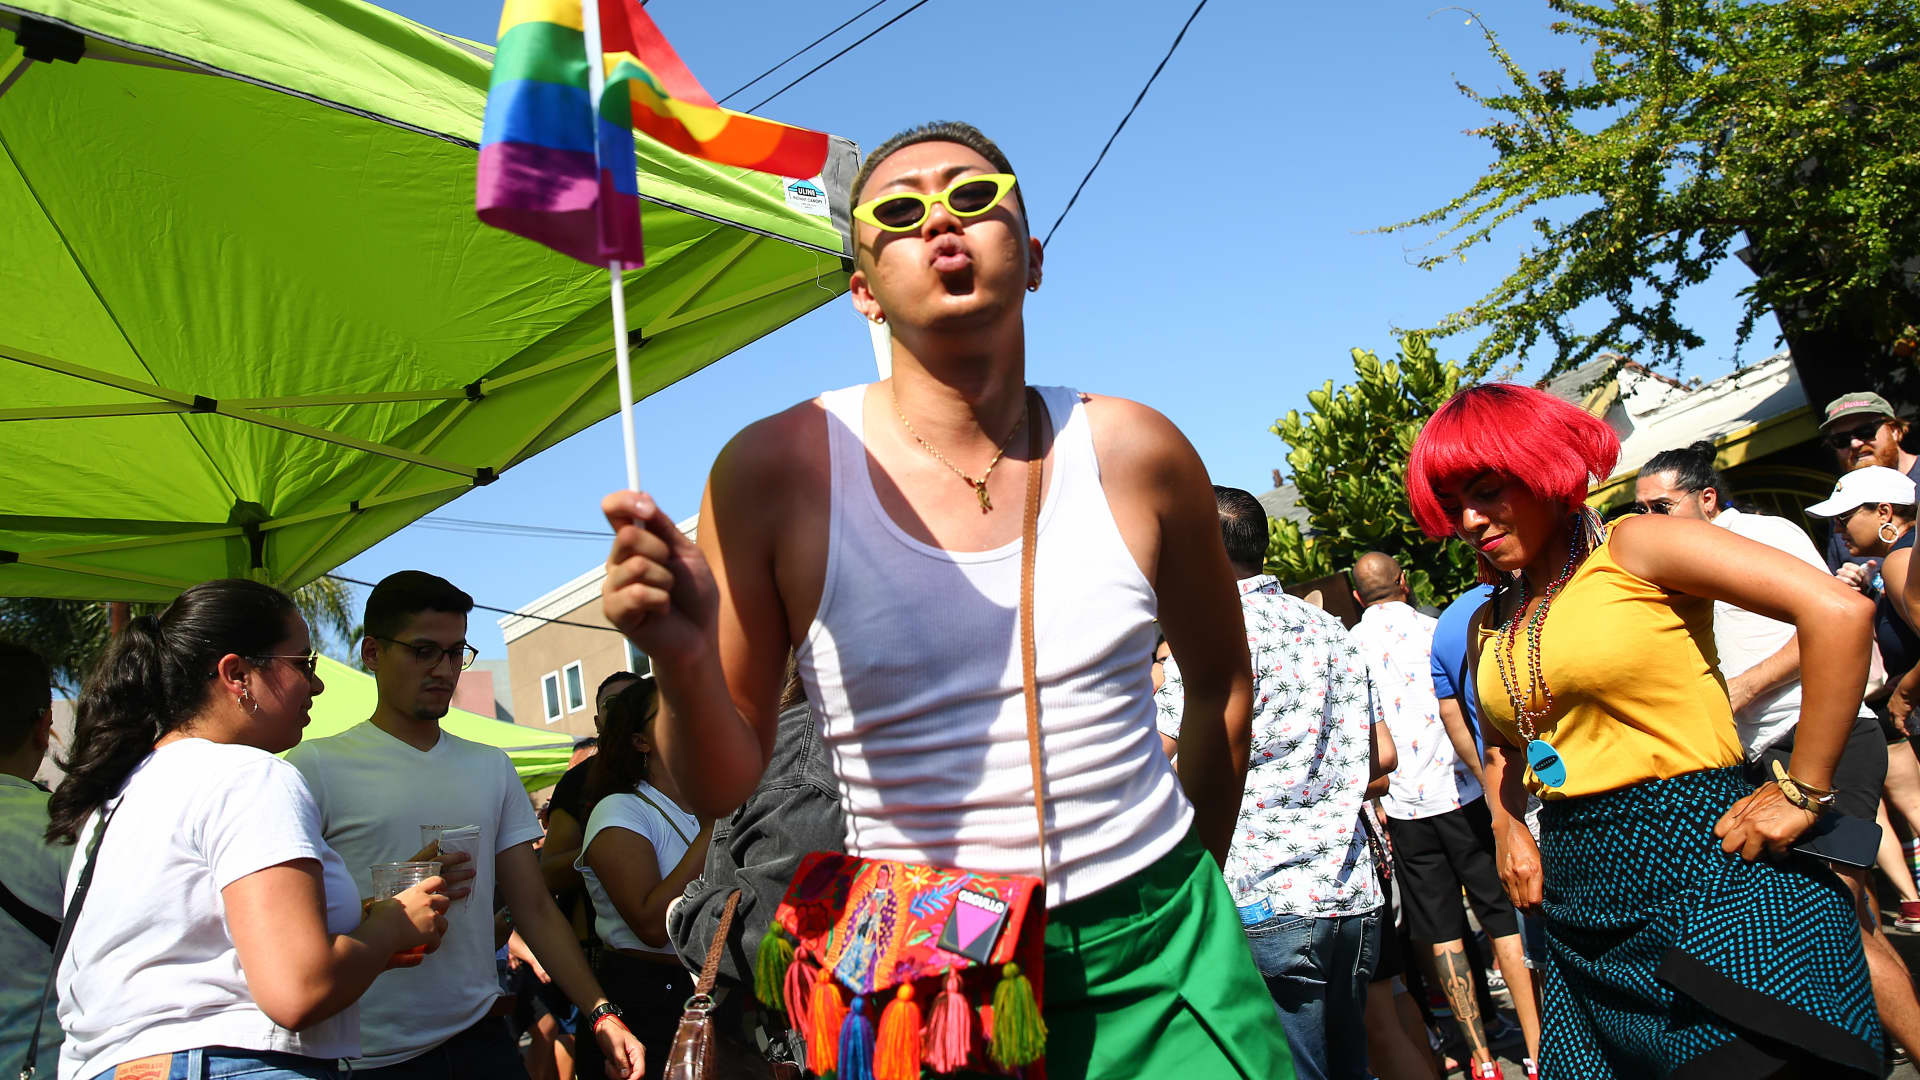 People dance at the Orgullo Fest (Pride Fest) in the predominantly Latino neighborhood of Boyle Heights on June 27, 2021 in Los Angeles, California.